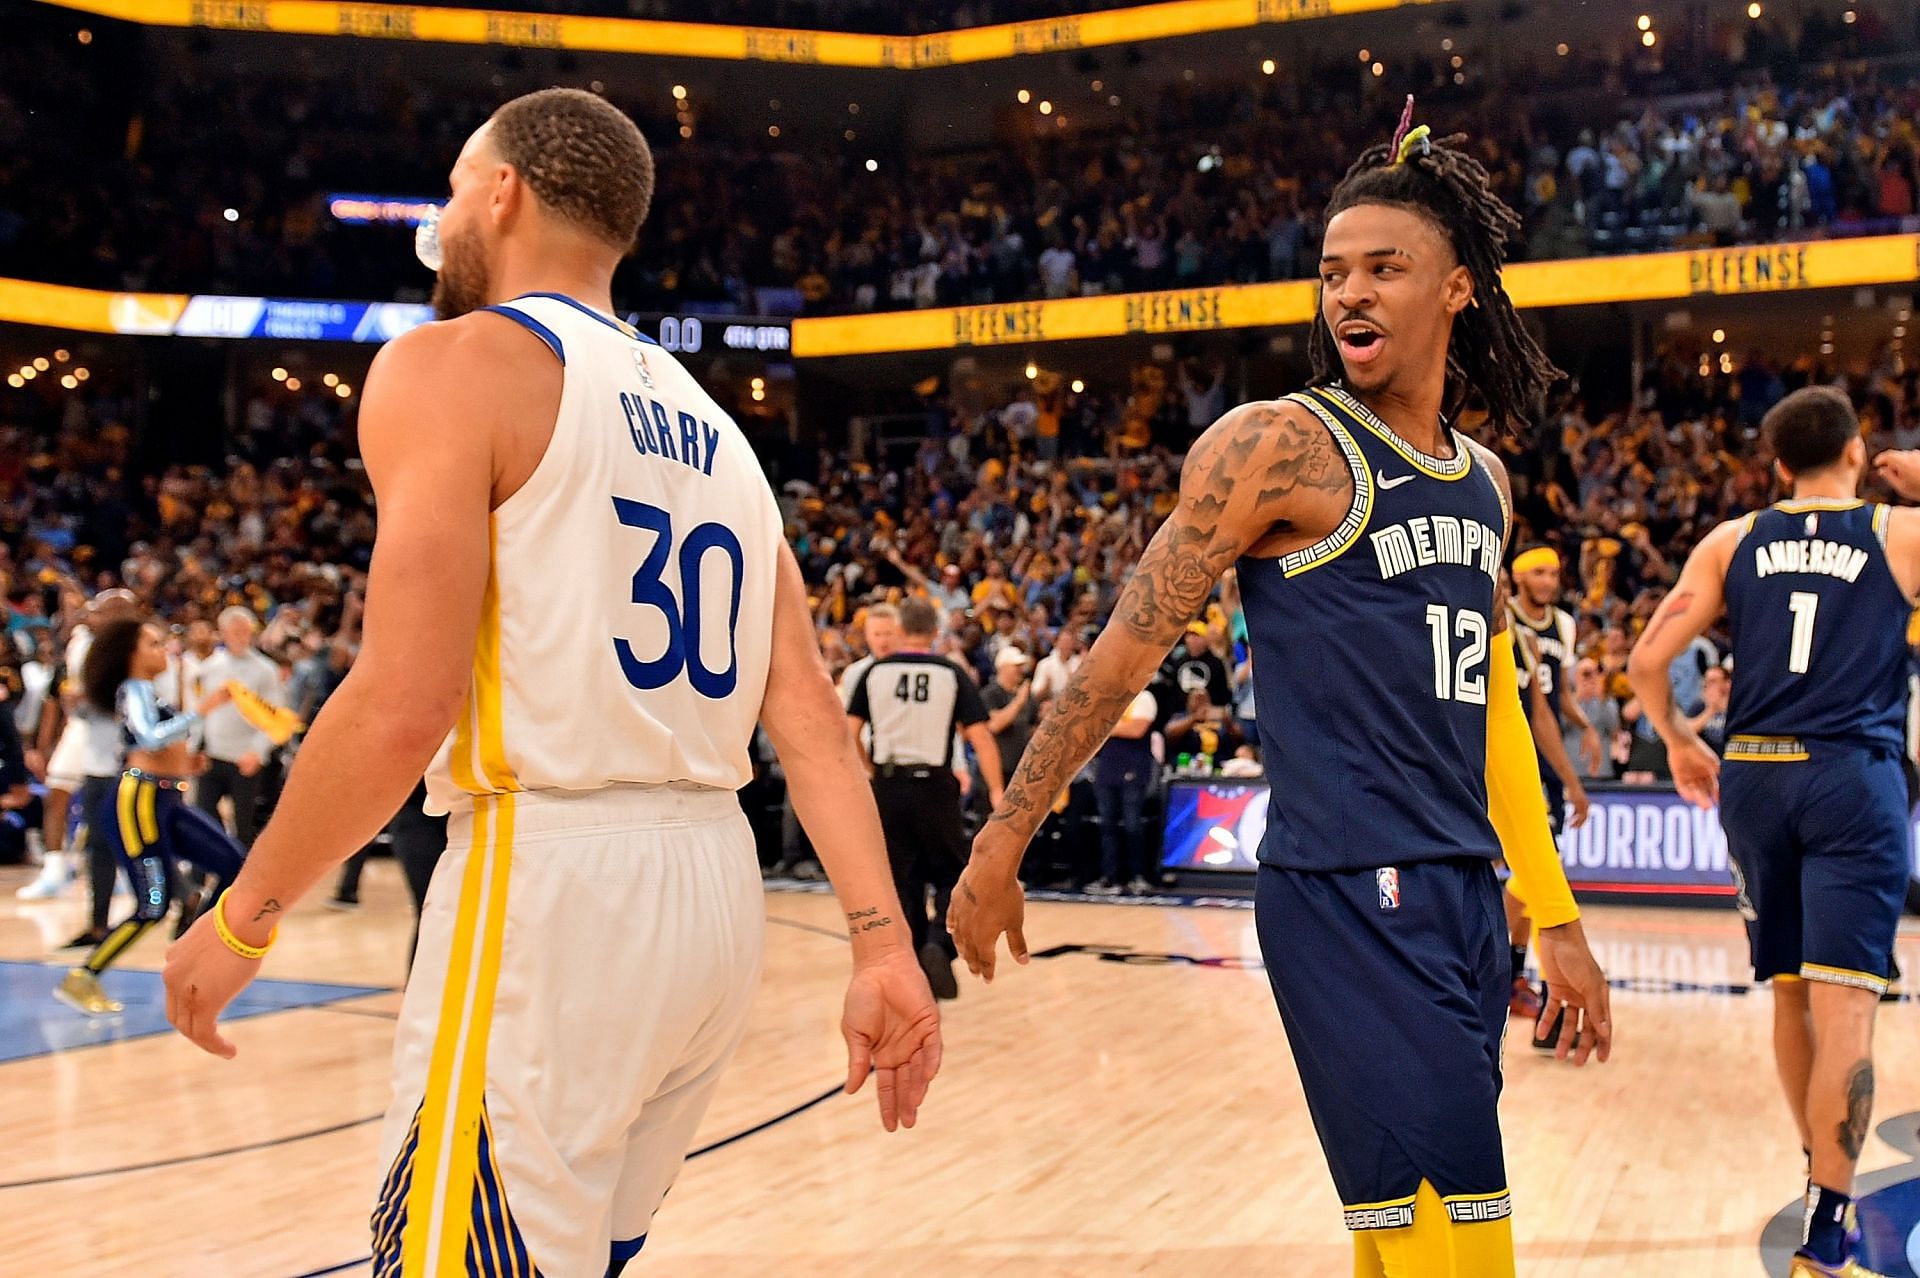 Steph Curry of the Warriors and Ja Morant of the Memphis Grizzlies